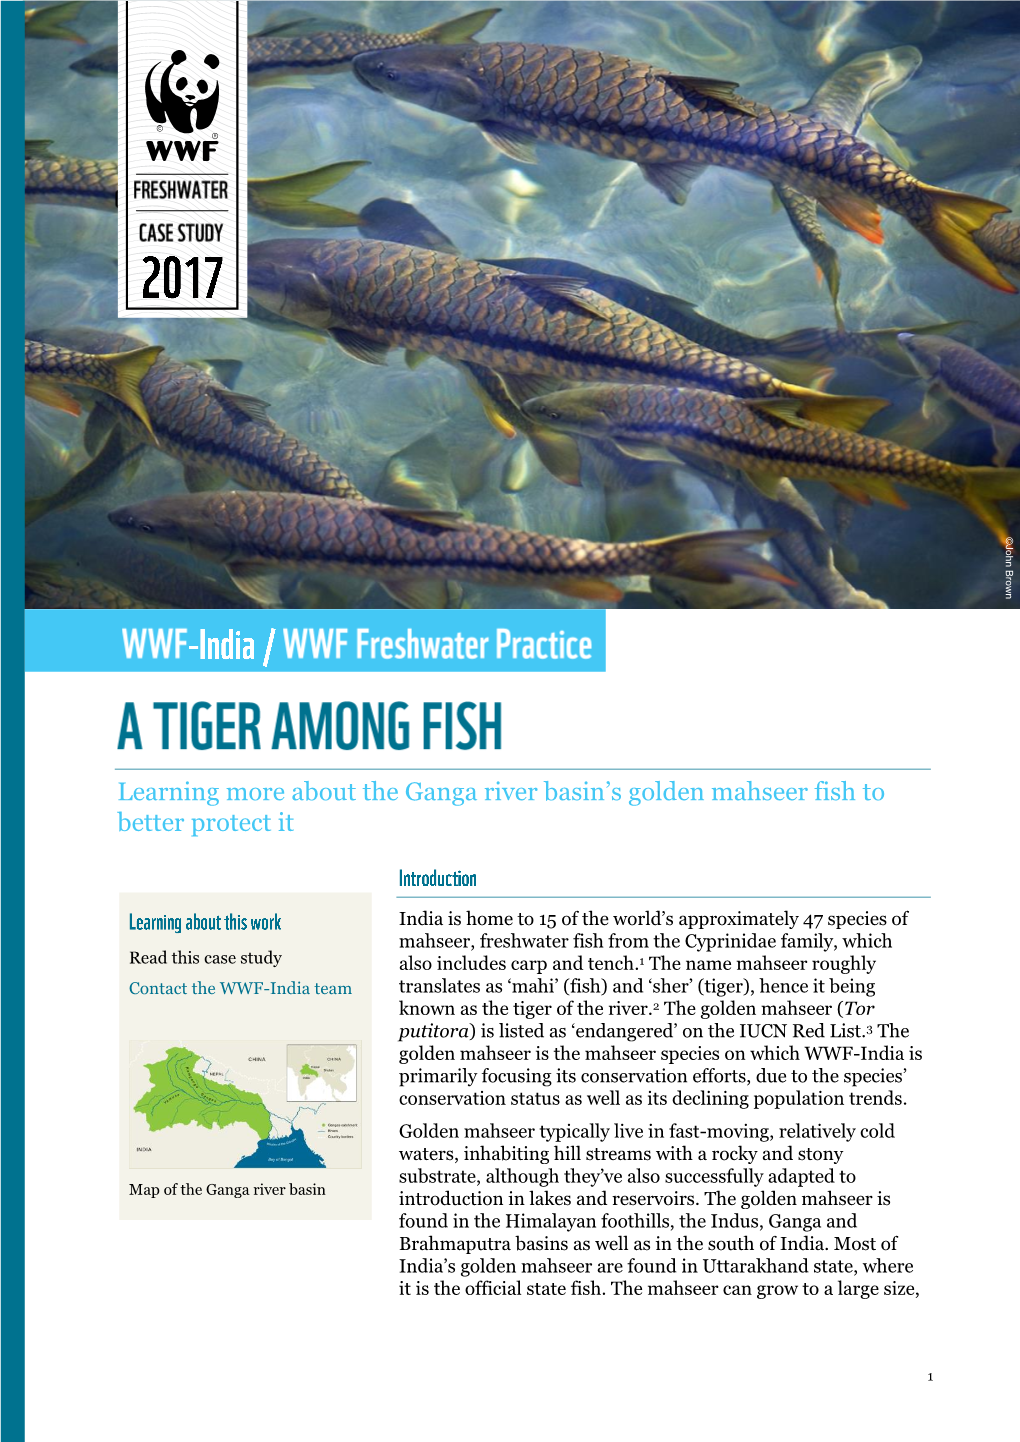 Learning More About the Ganga River Basin's Golden Mahseer Fish To